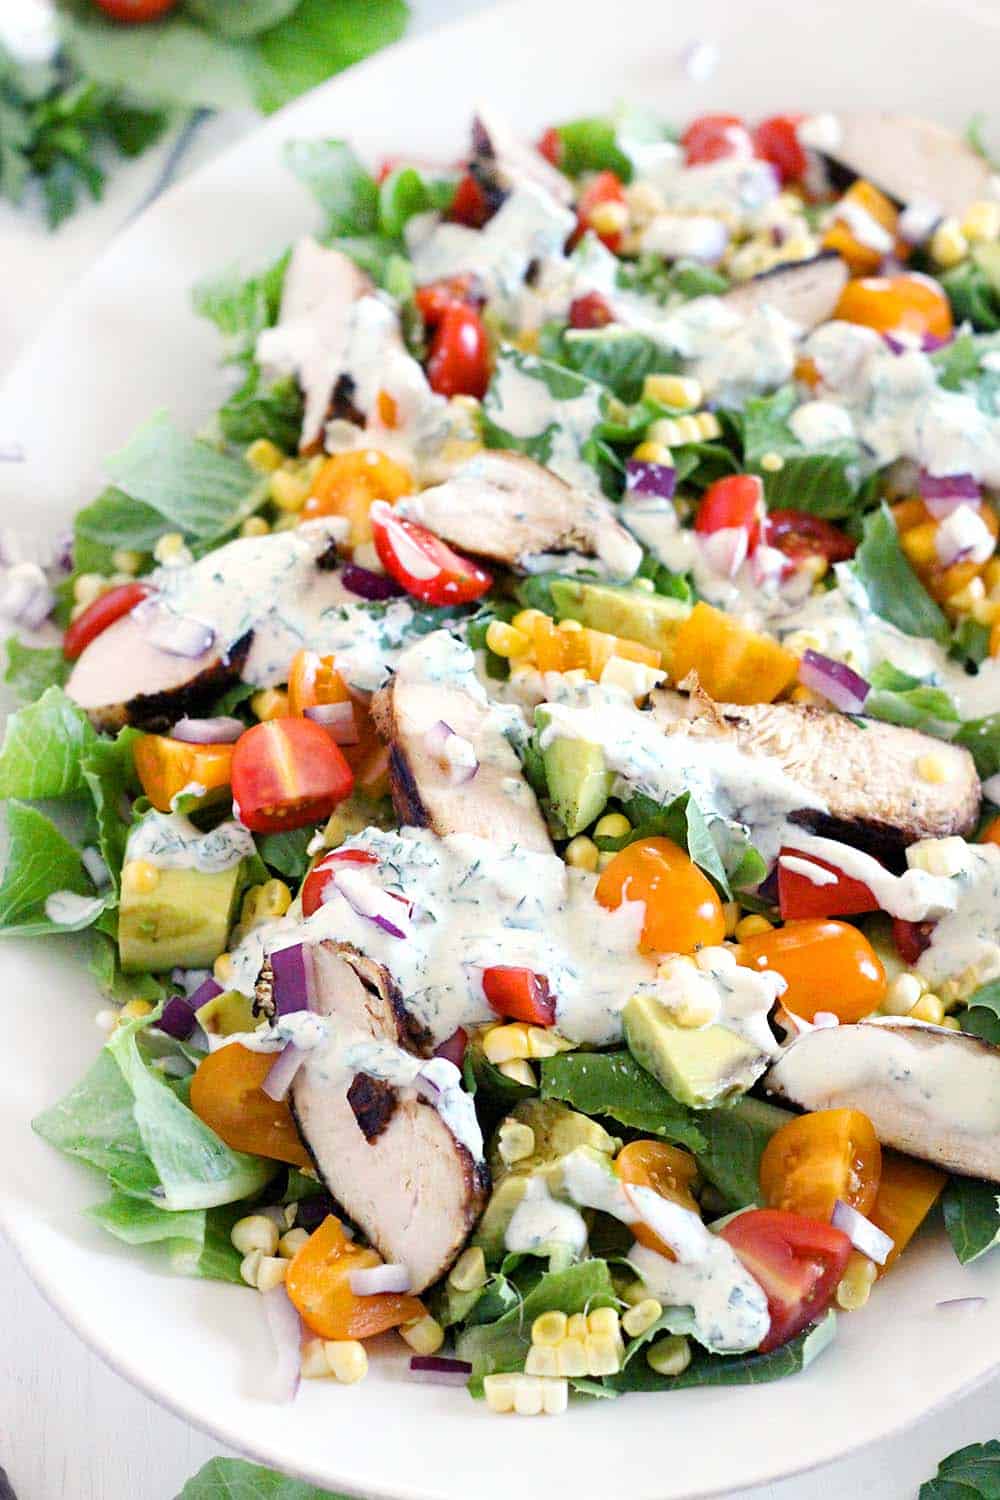 This lighter version of Cobb Salad with Buttermilk Ranch Dressing is PACKED with flavor. It's a healthy and hearty gluten-free recipe, and it won't weigh you down.